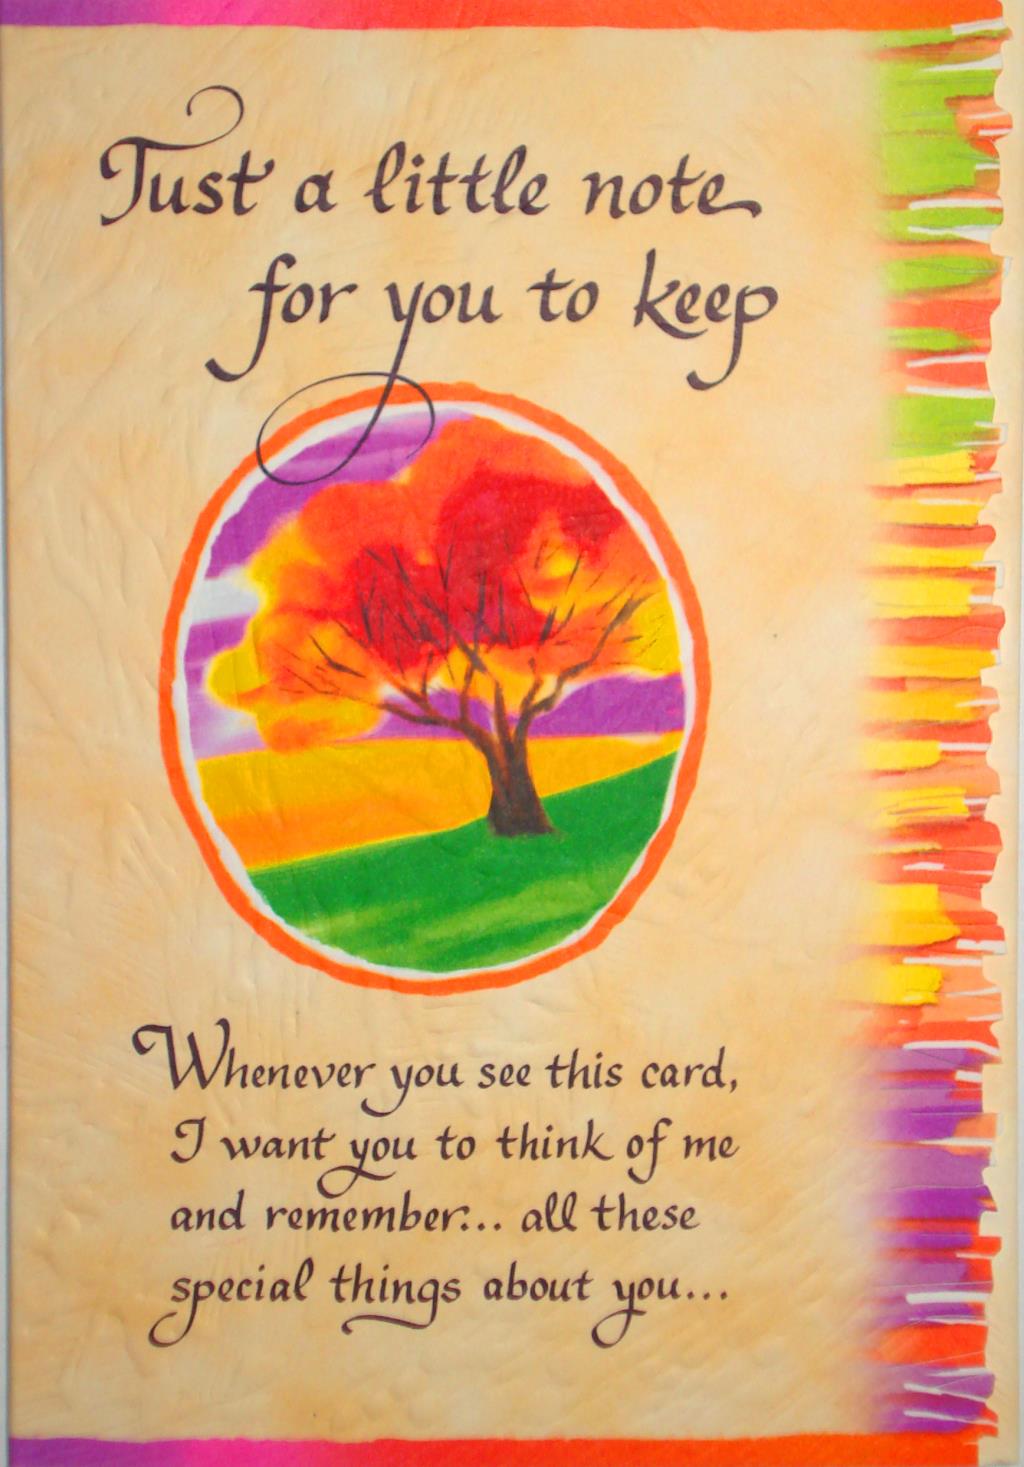 Just A Little Note For You - Thinking of You - Blue Mountain Arts